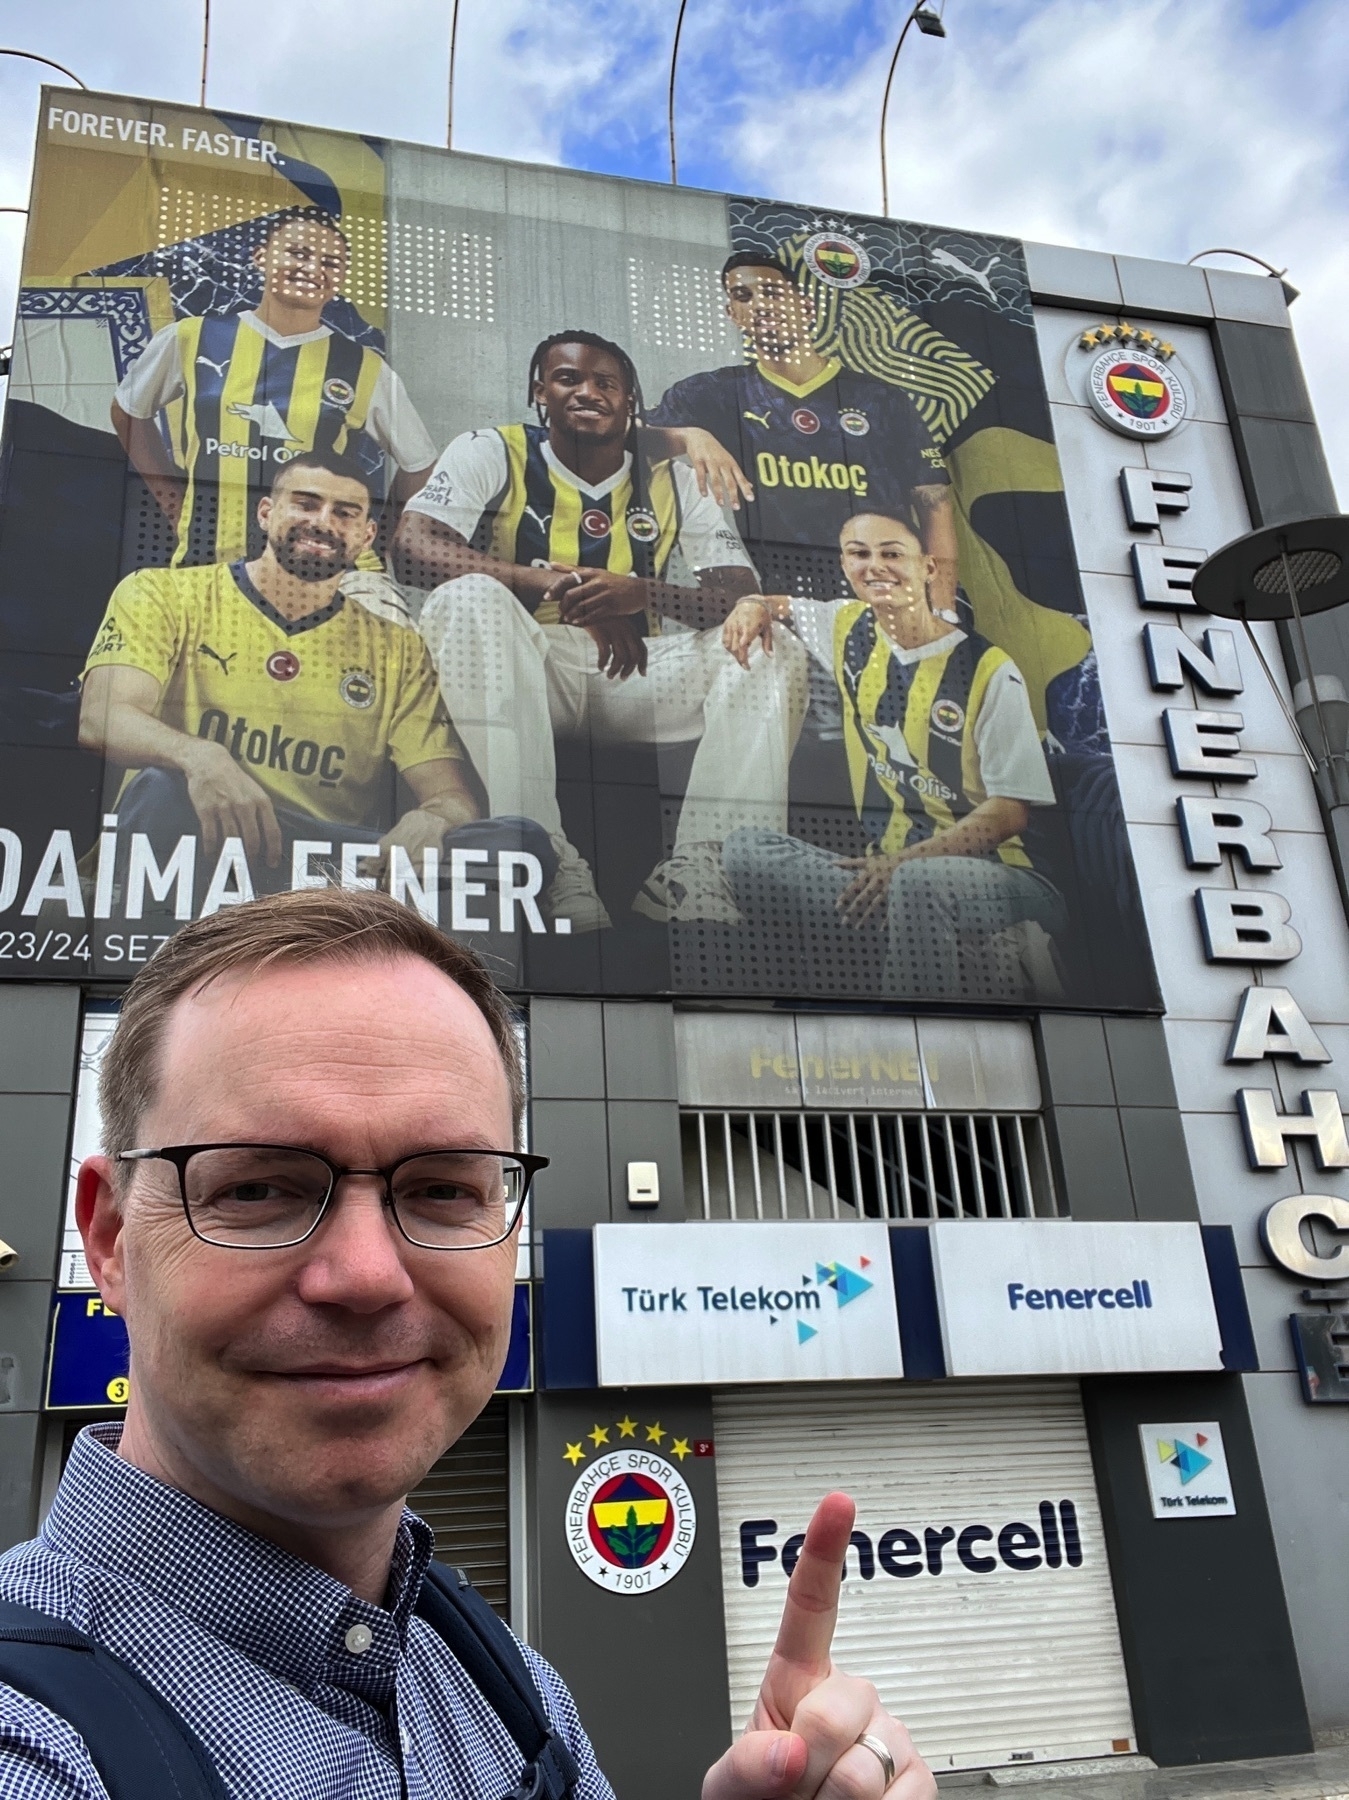 Chad selfie at the Fenerbahçe ticket booth